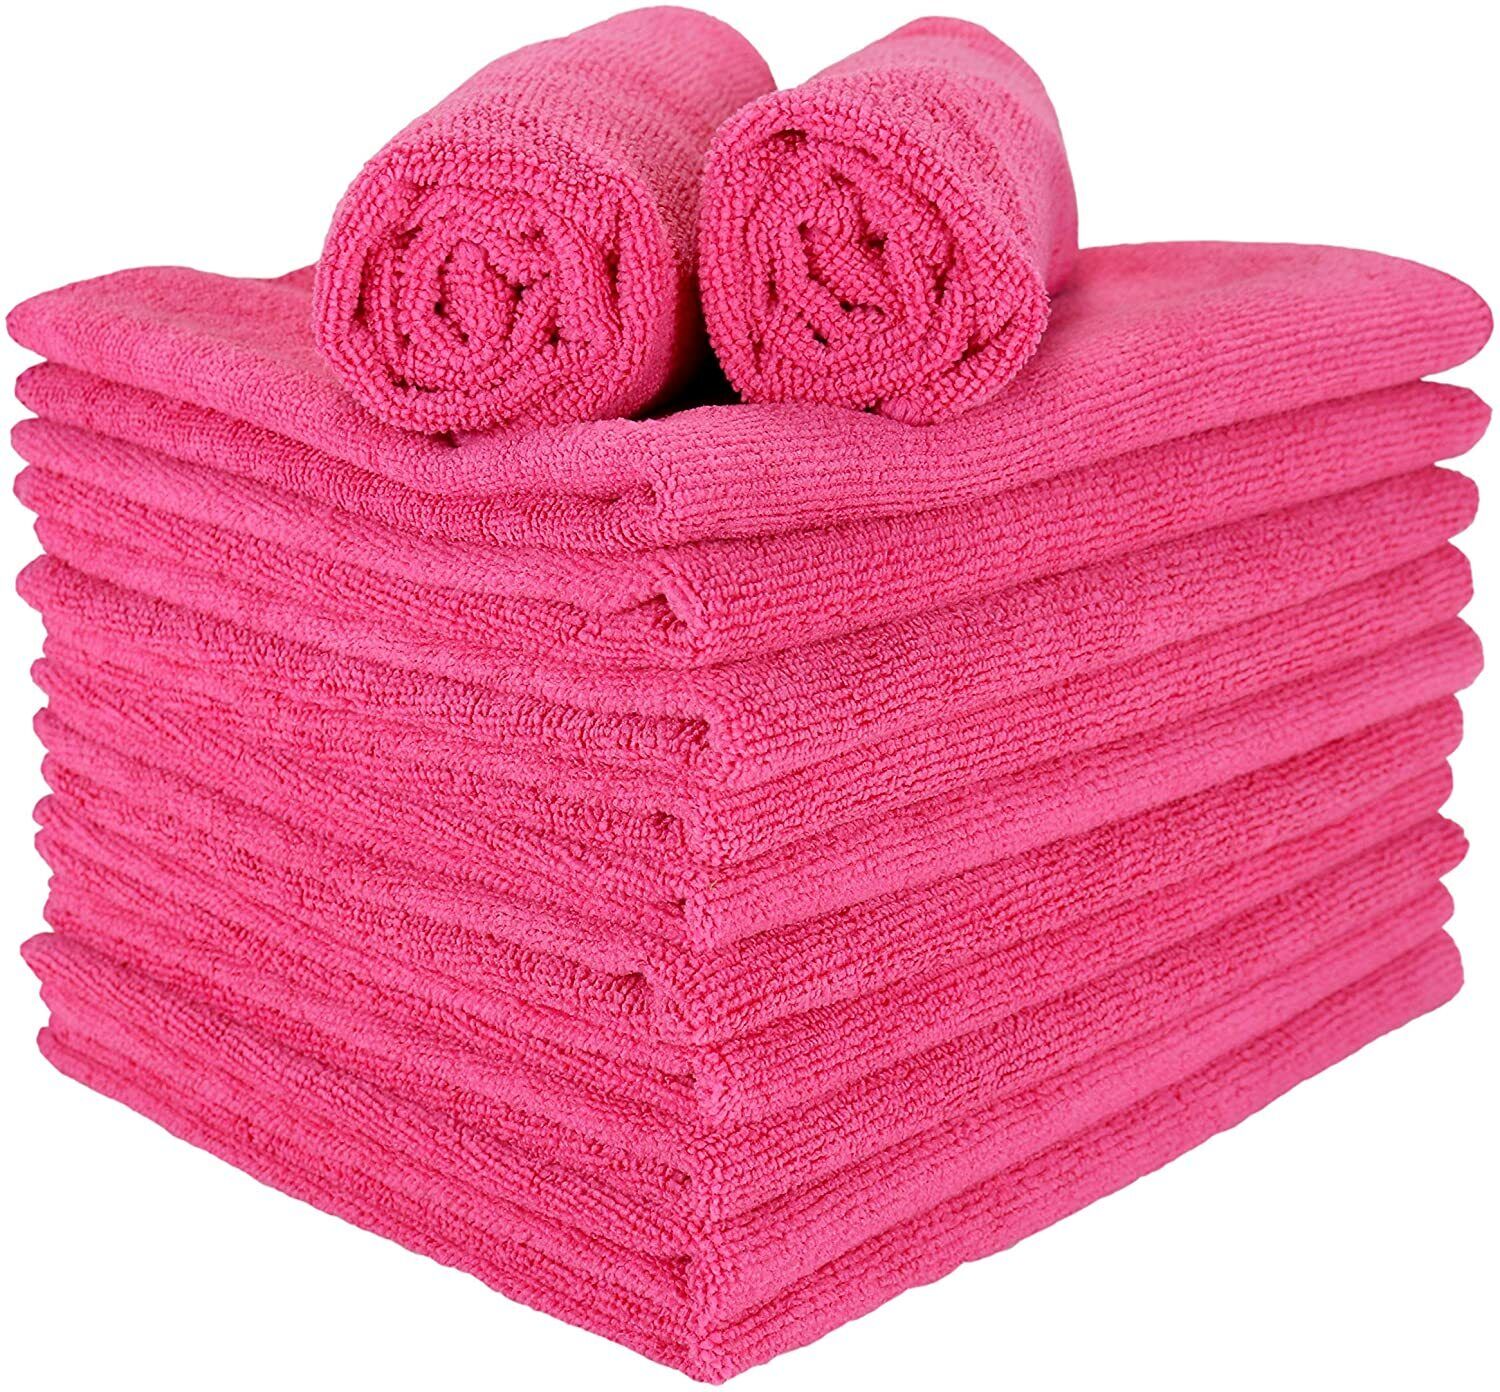 Microfiber Hand Towels 12 Packs - 16 x 27 Soft Reusable Absorbent Color Options Arkwright Does Not Apply - фотография #3